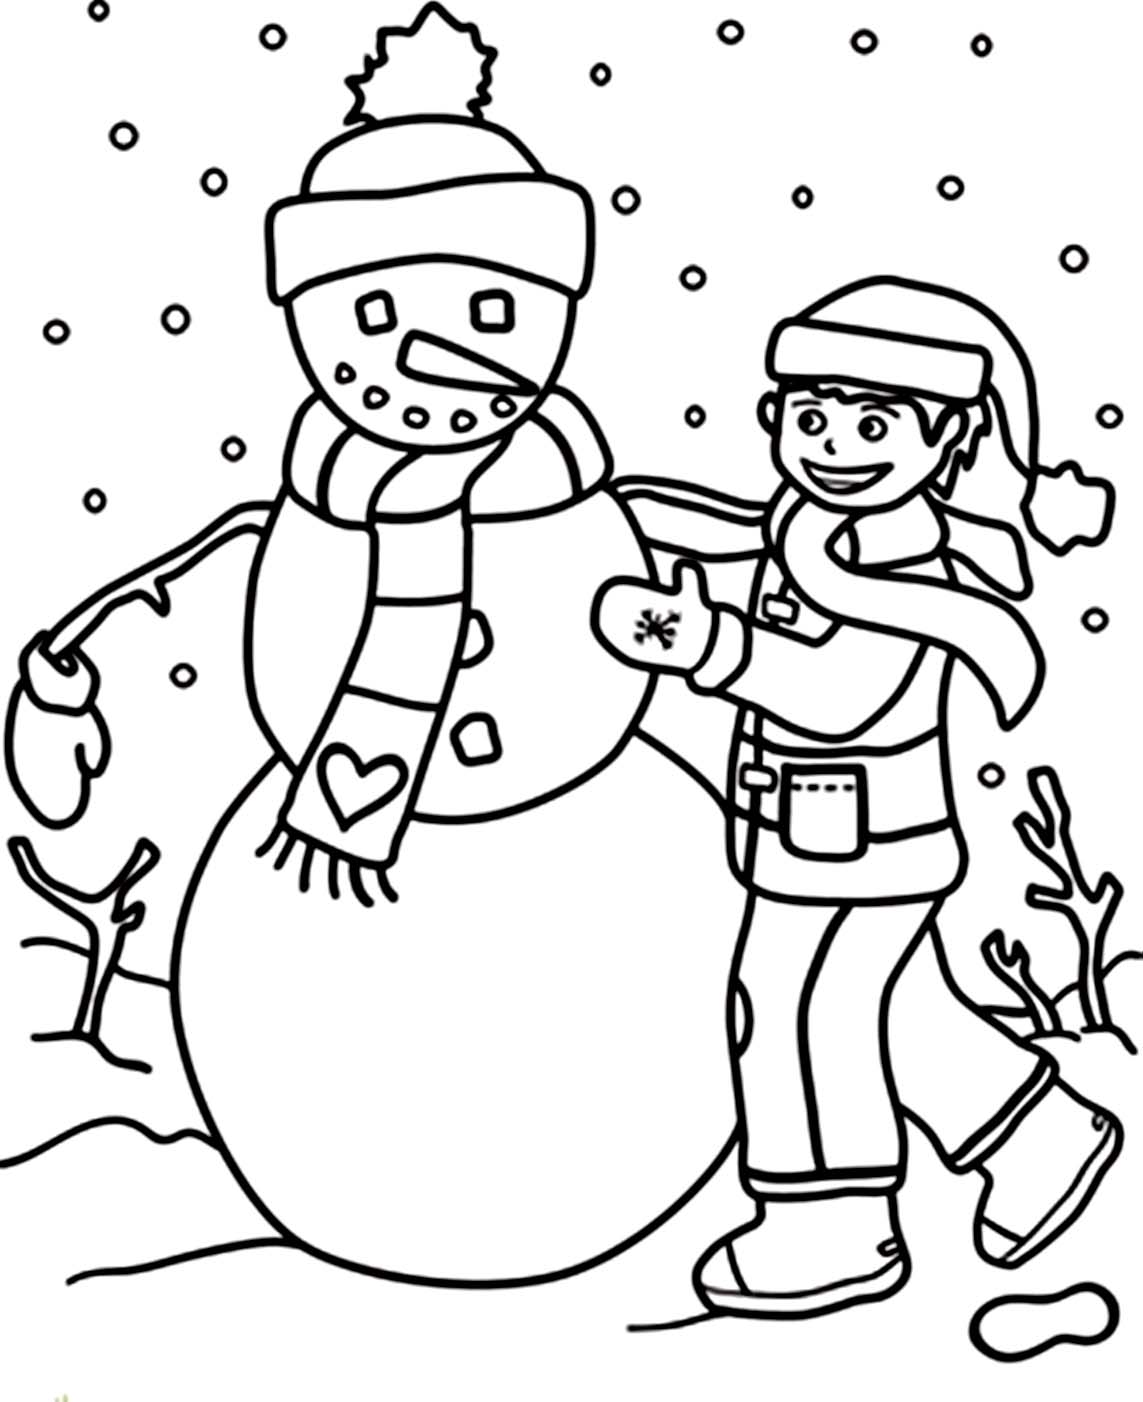 printable-coloring-pages-of-snowman-at-getdrawings-free-download